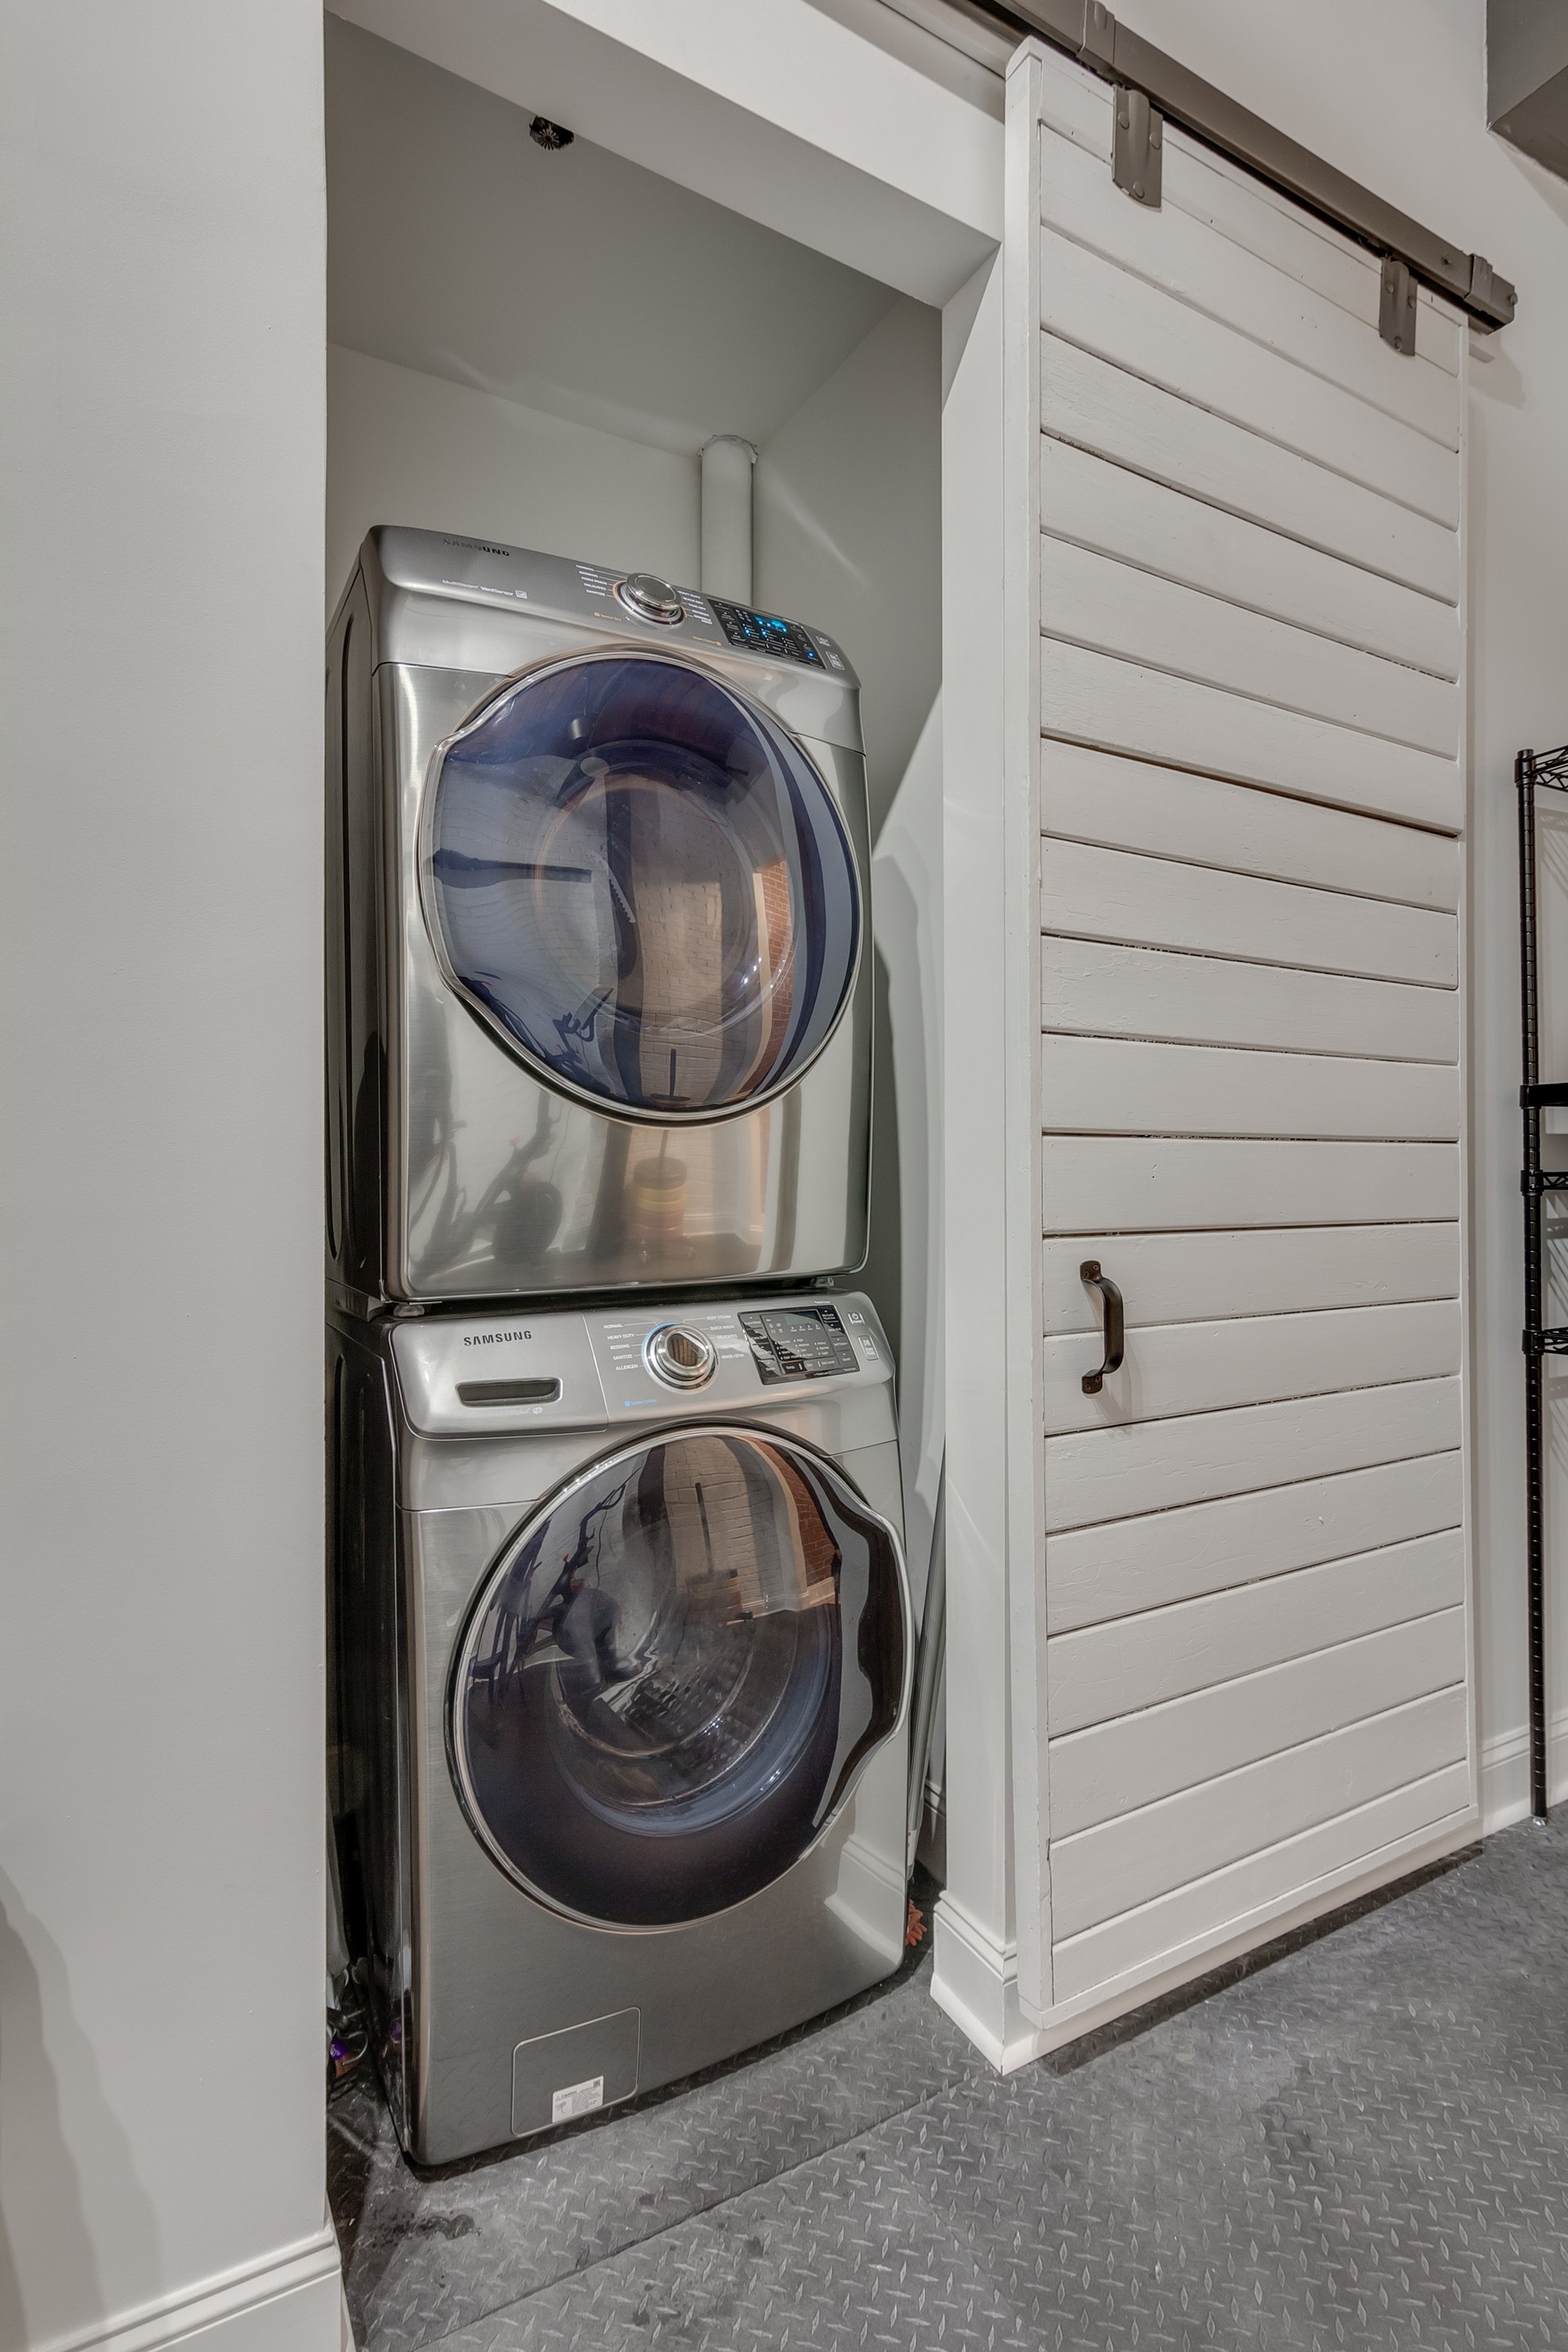 Stainless steel front loading stacked washer and dryer with white sliding barn door in front